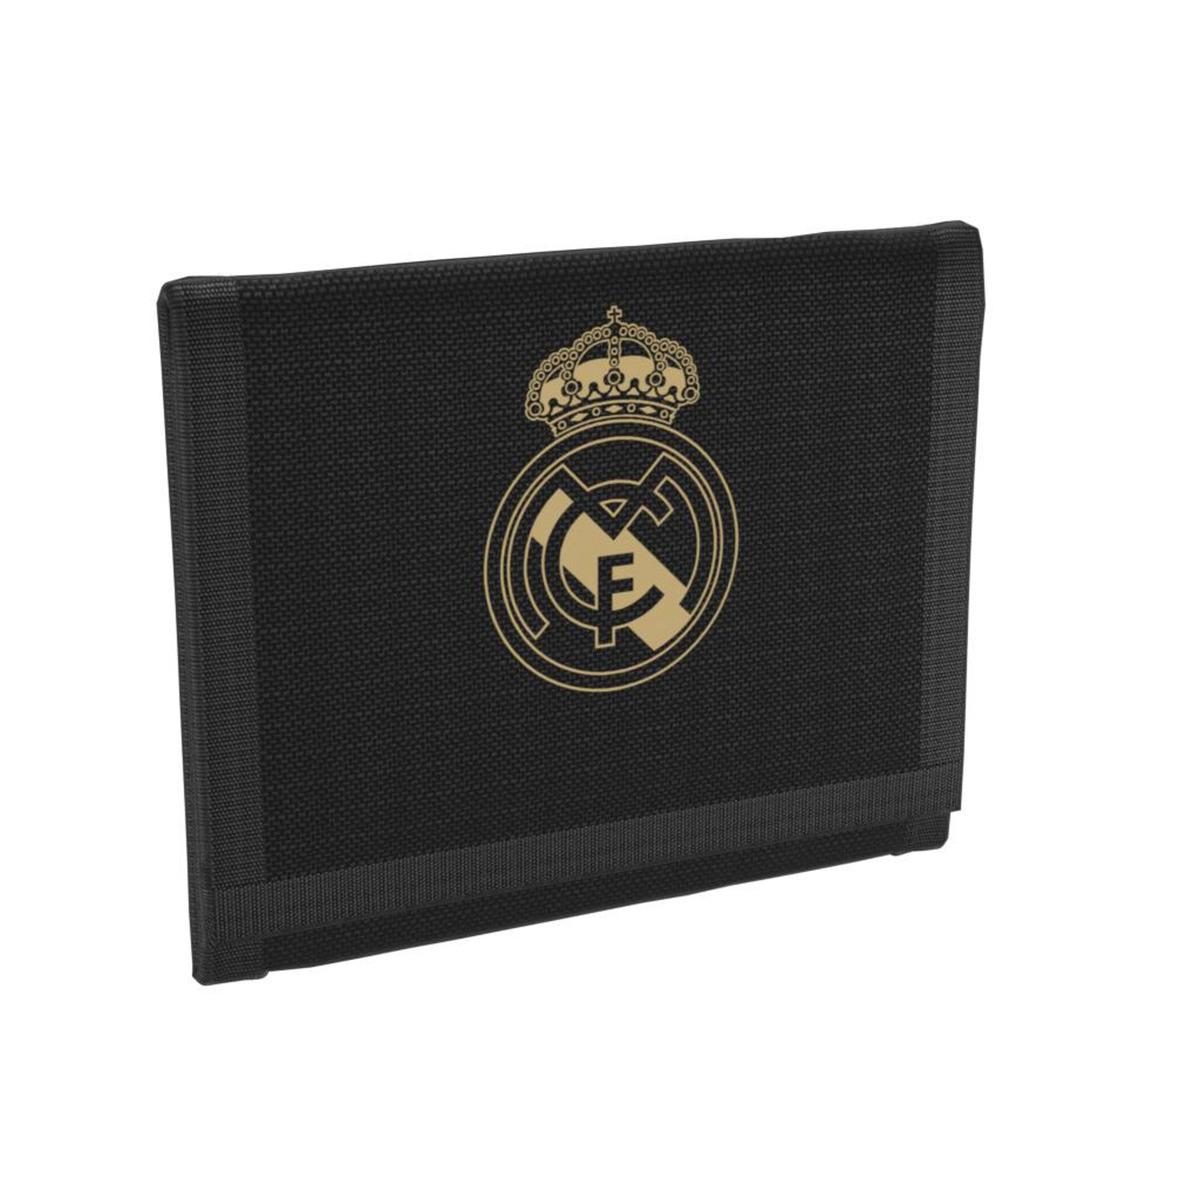 adidas Synthetic Real Madrid Cf Wallet in Black for Men - Lyst